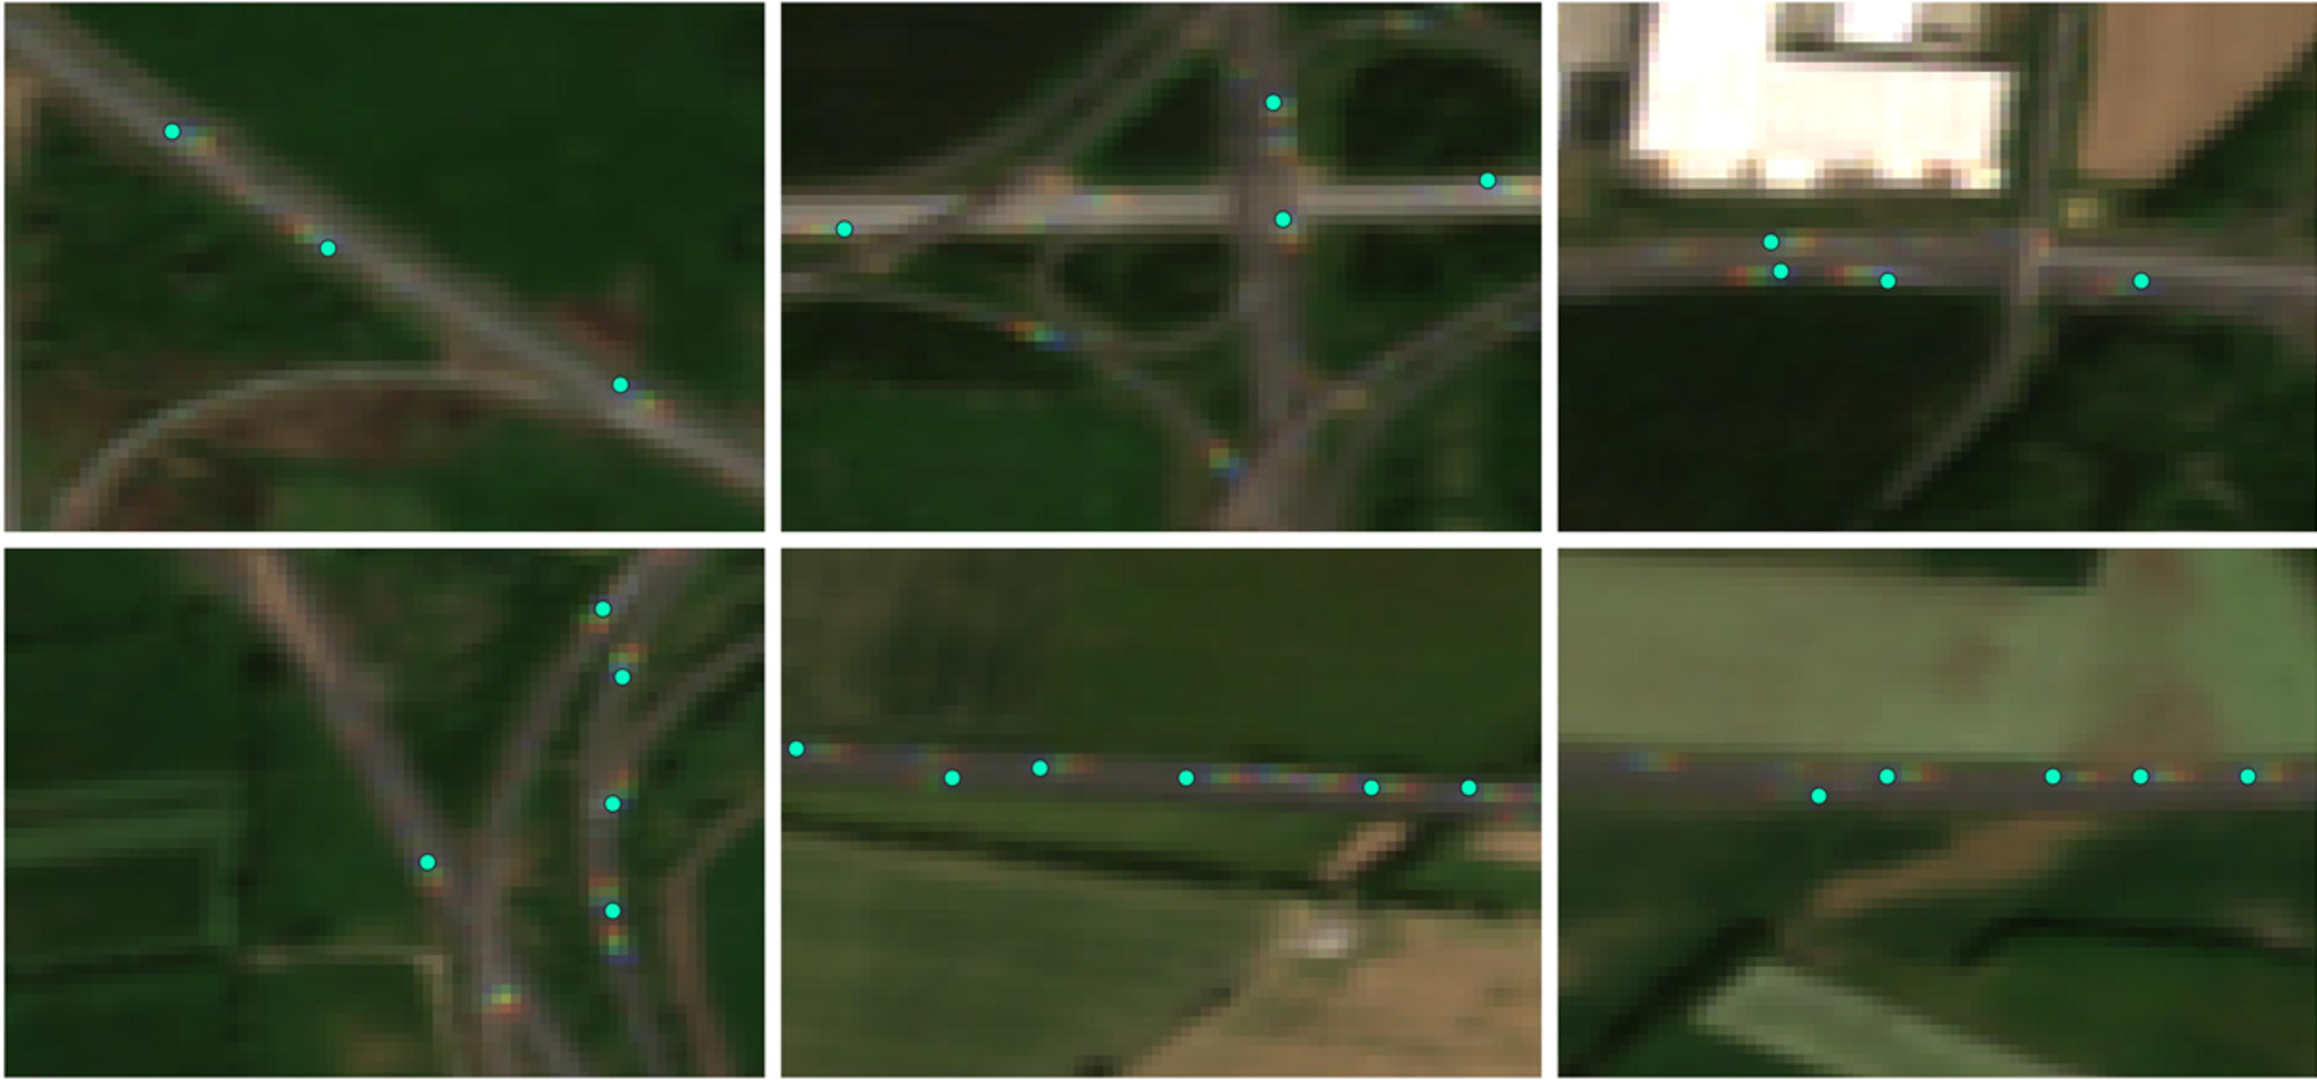 Truck detection using data from Copernicus Sentinel-2